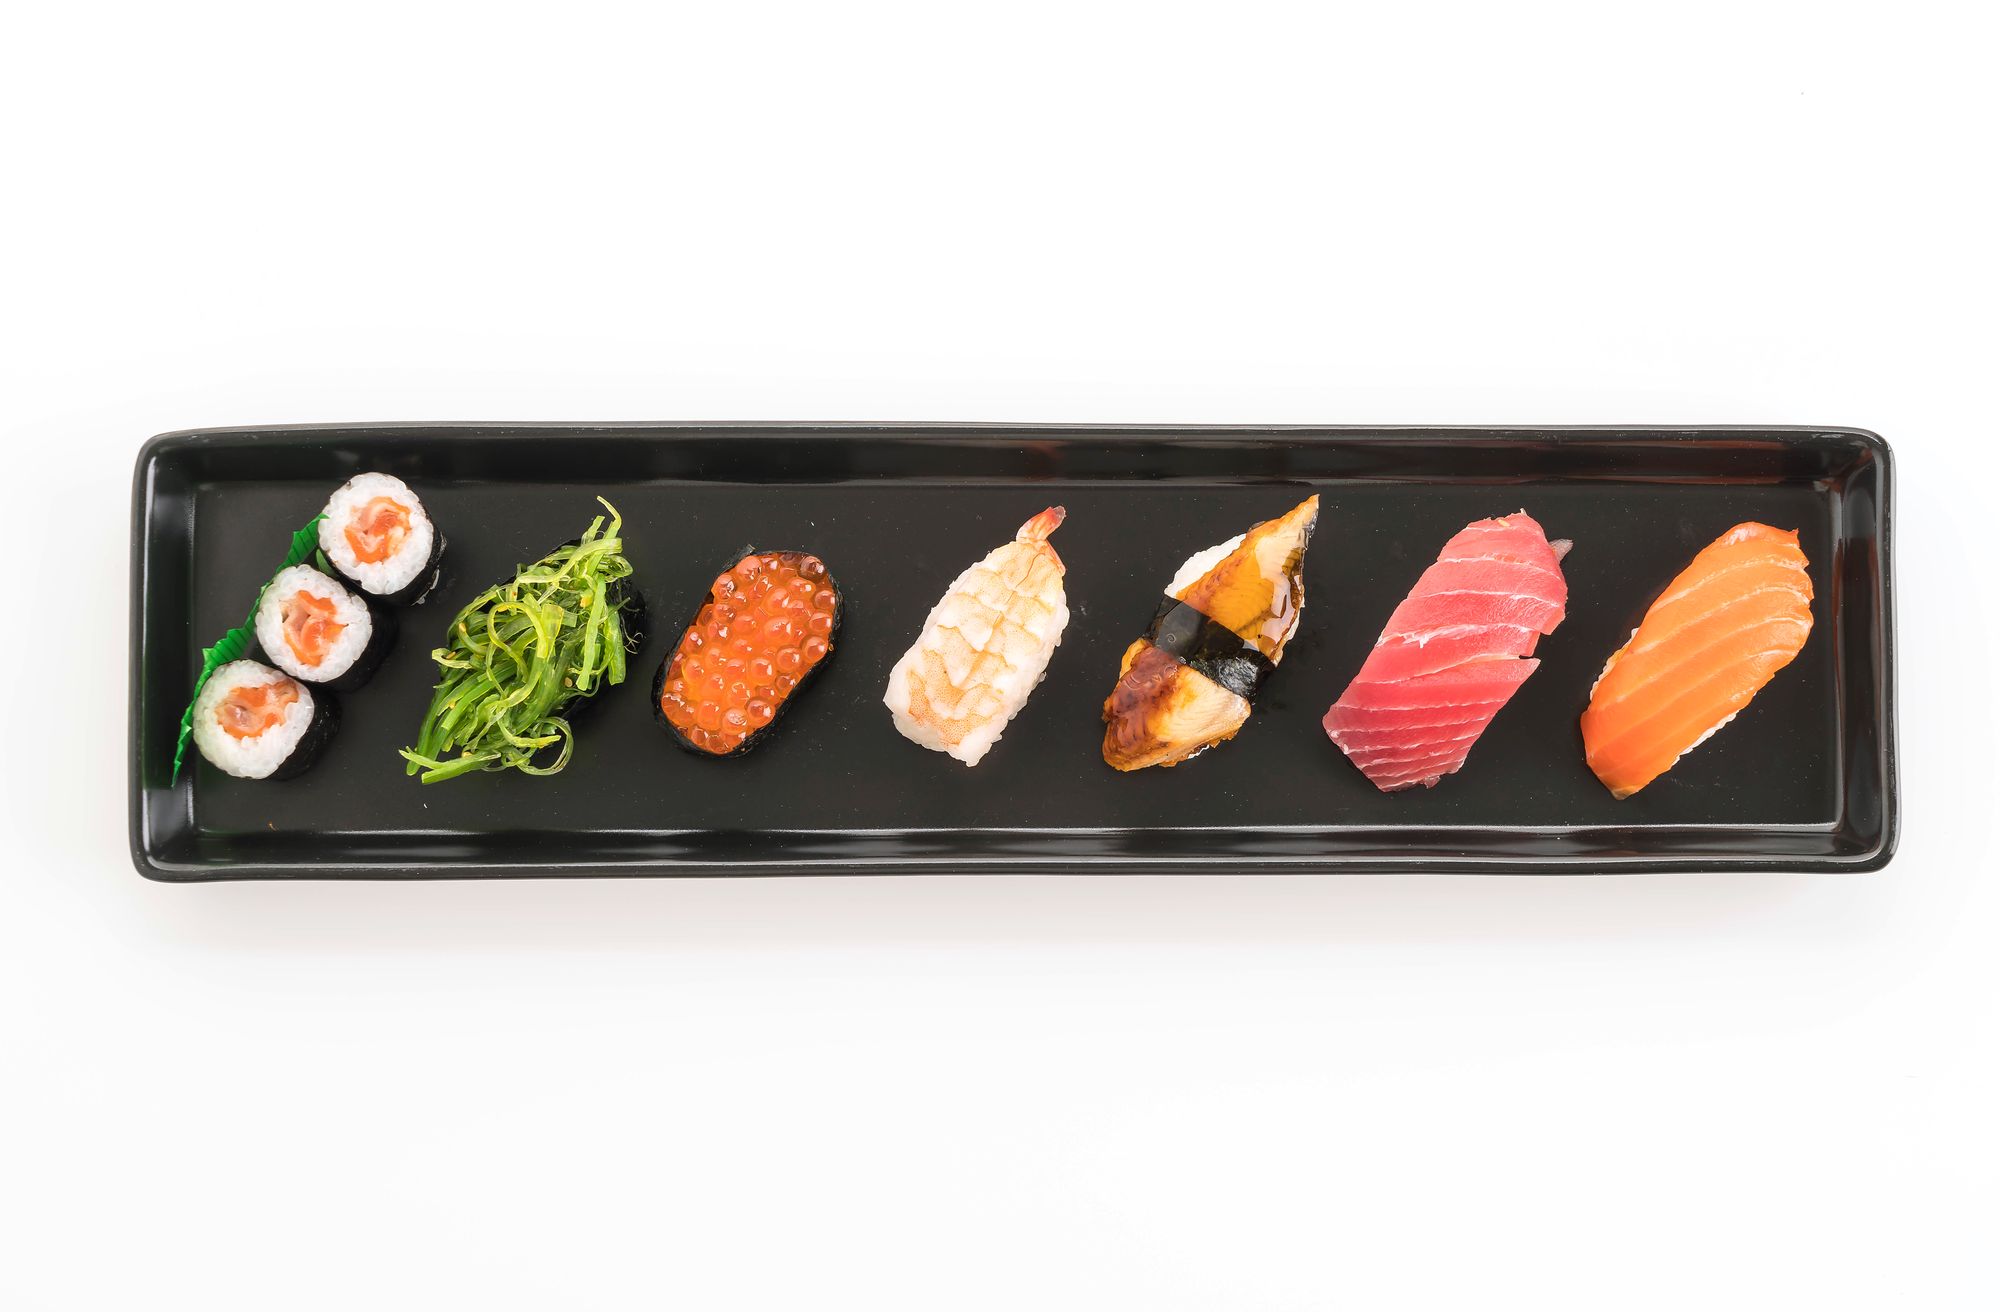 Top 15 Sushi Restaurants in Chicago: The Best Places to Go for Your Favorite Roll!